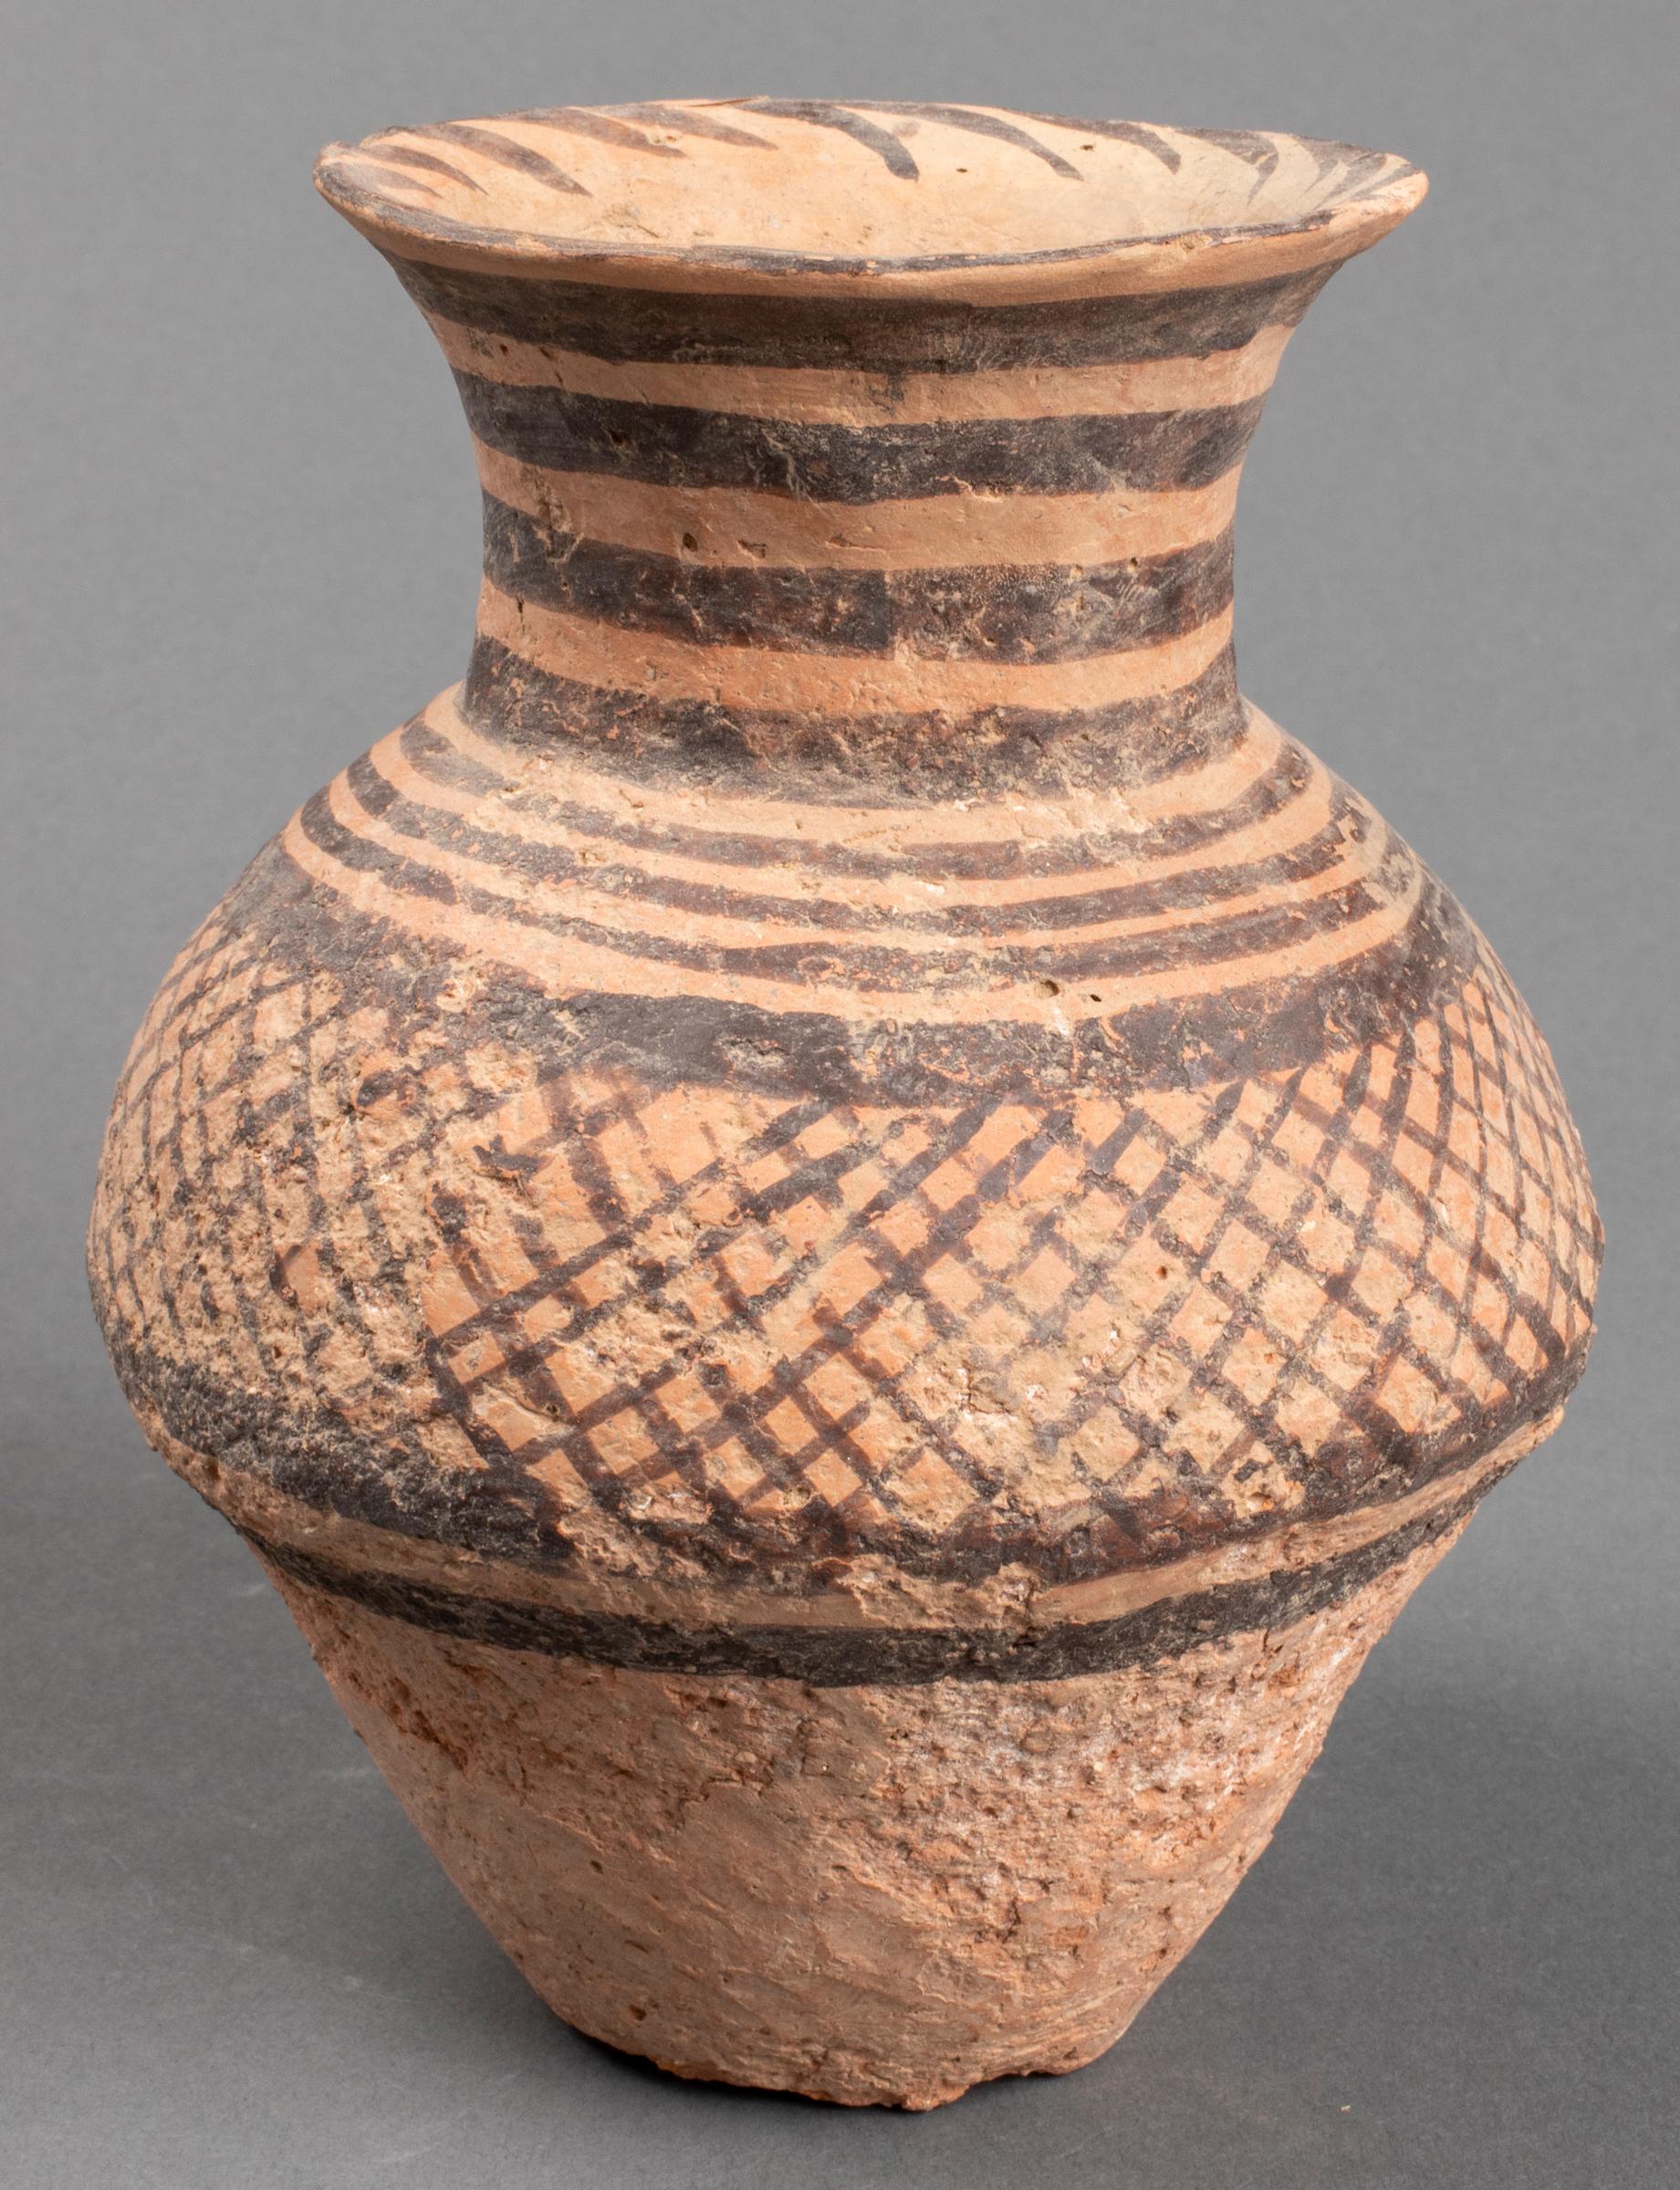 Chinese Neolithic Period (3000 BCE - 2000 BCE) pottery vessel, earthenware with painted decoration. 5.5